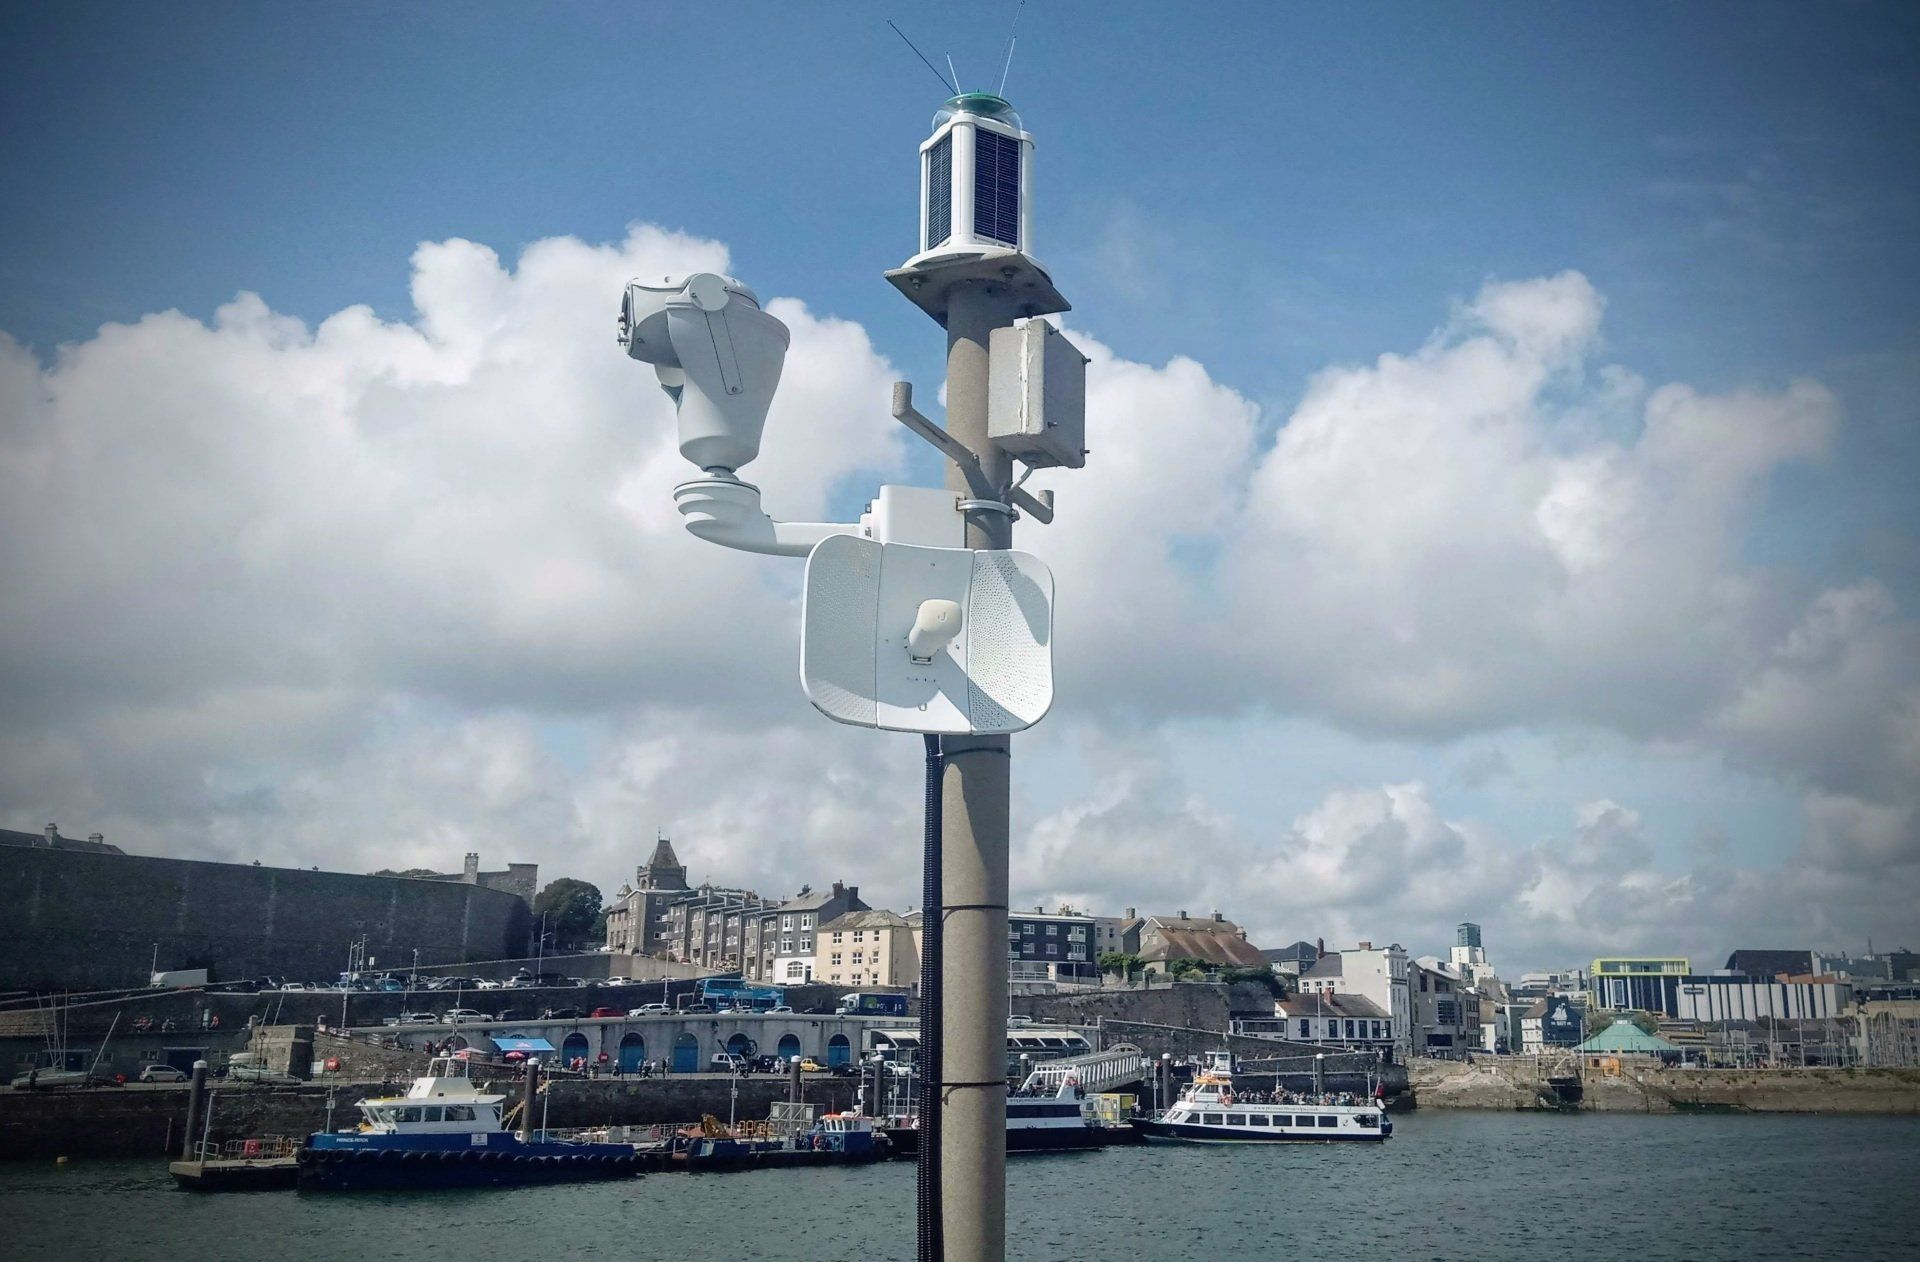 Cattewater Harbour camera system